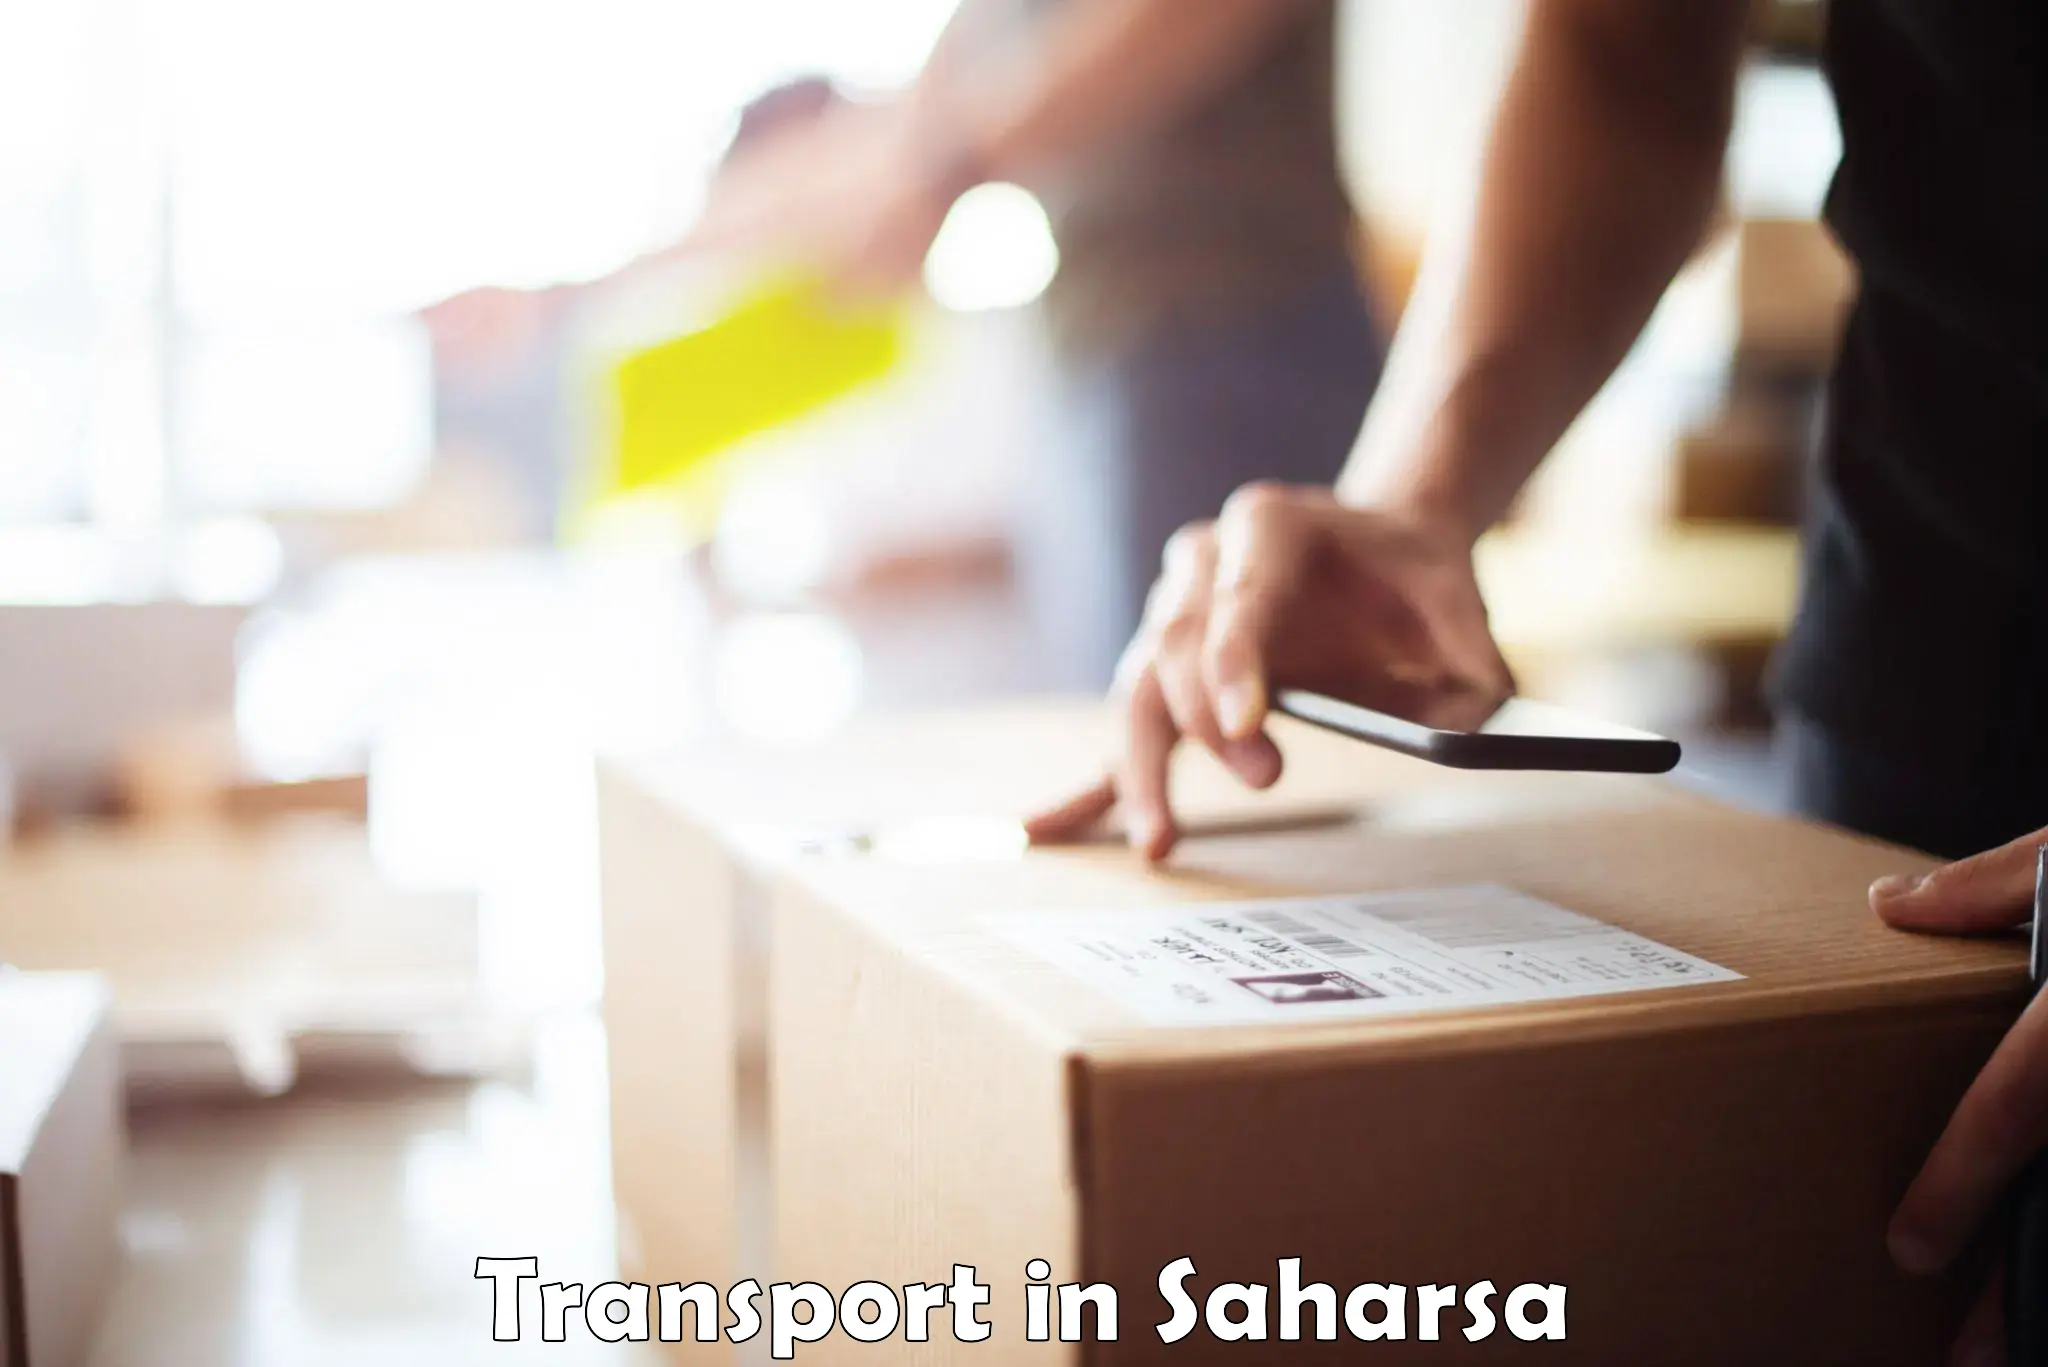 Container transport service in Saharsa